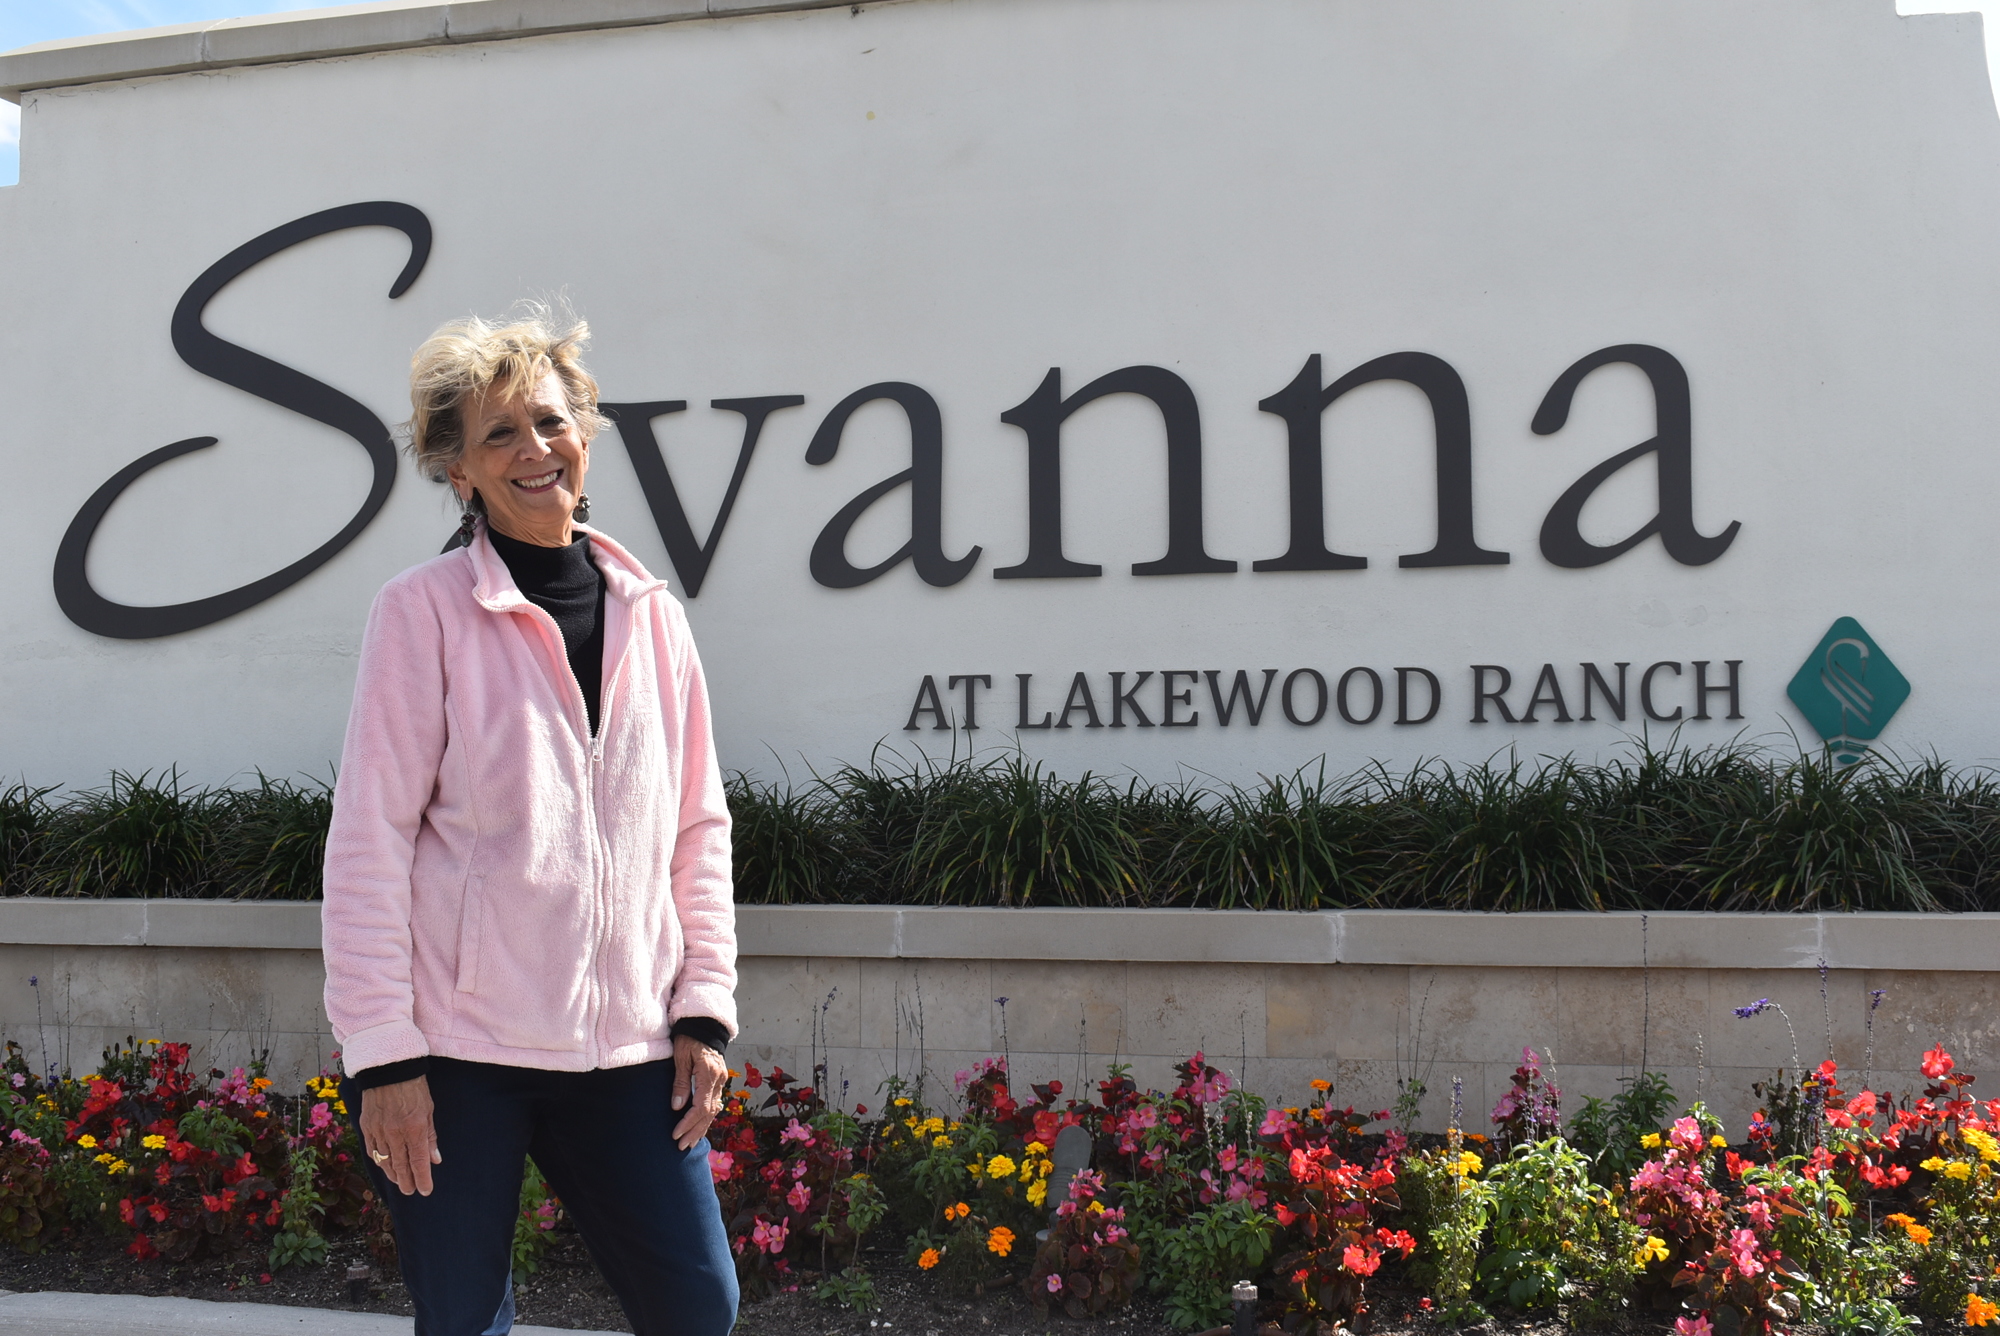 Savanna resident Anna Gonnella was concerned about the possibility of increased traffic on roads owned and maintained by the community's HOA, among other reasons for opposing the commercial development.